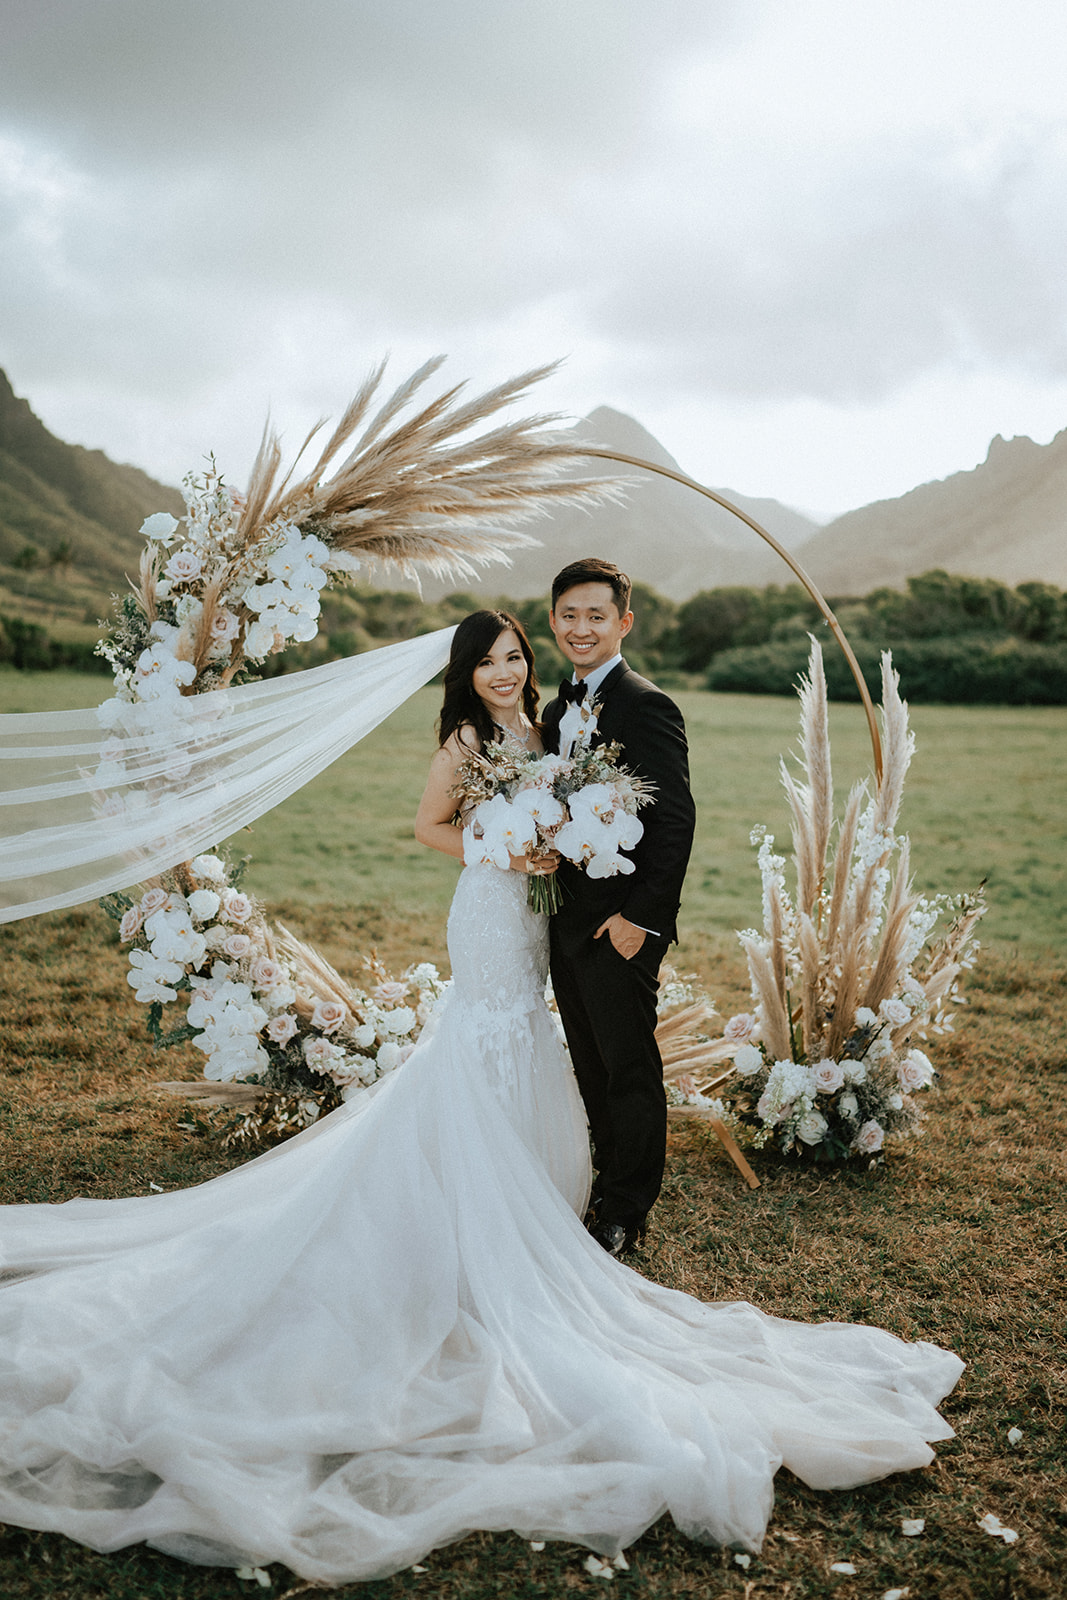 A couple that just got hitched in front of their arbor in Kualoa Ranch